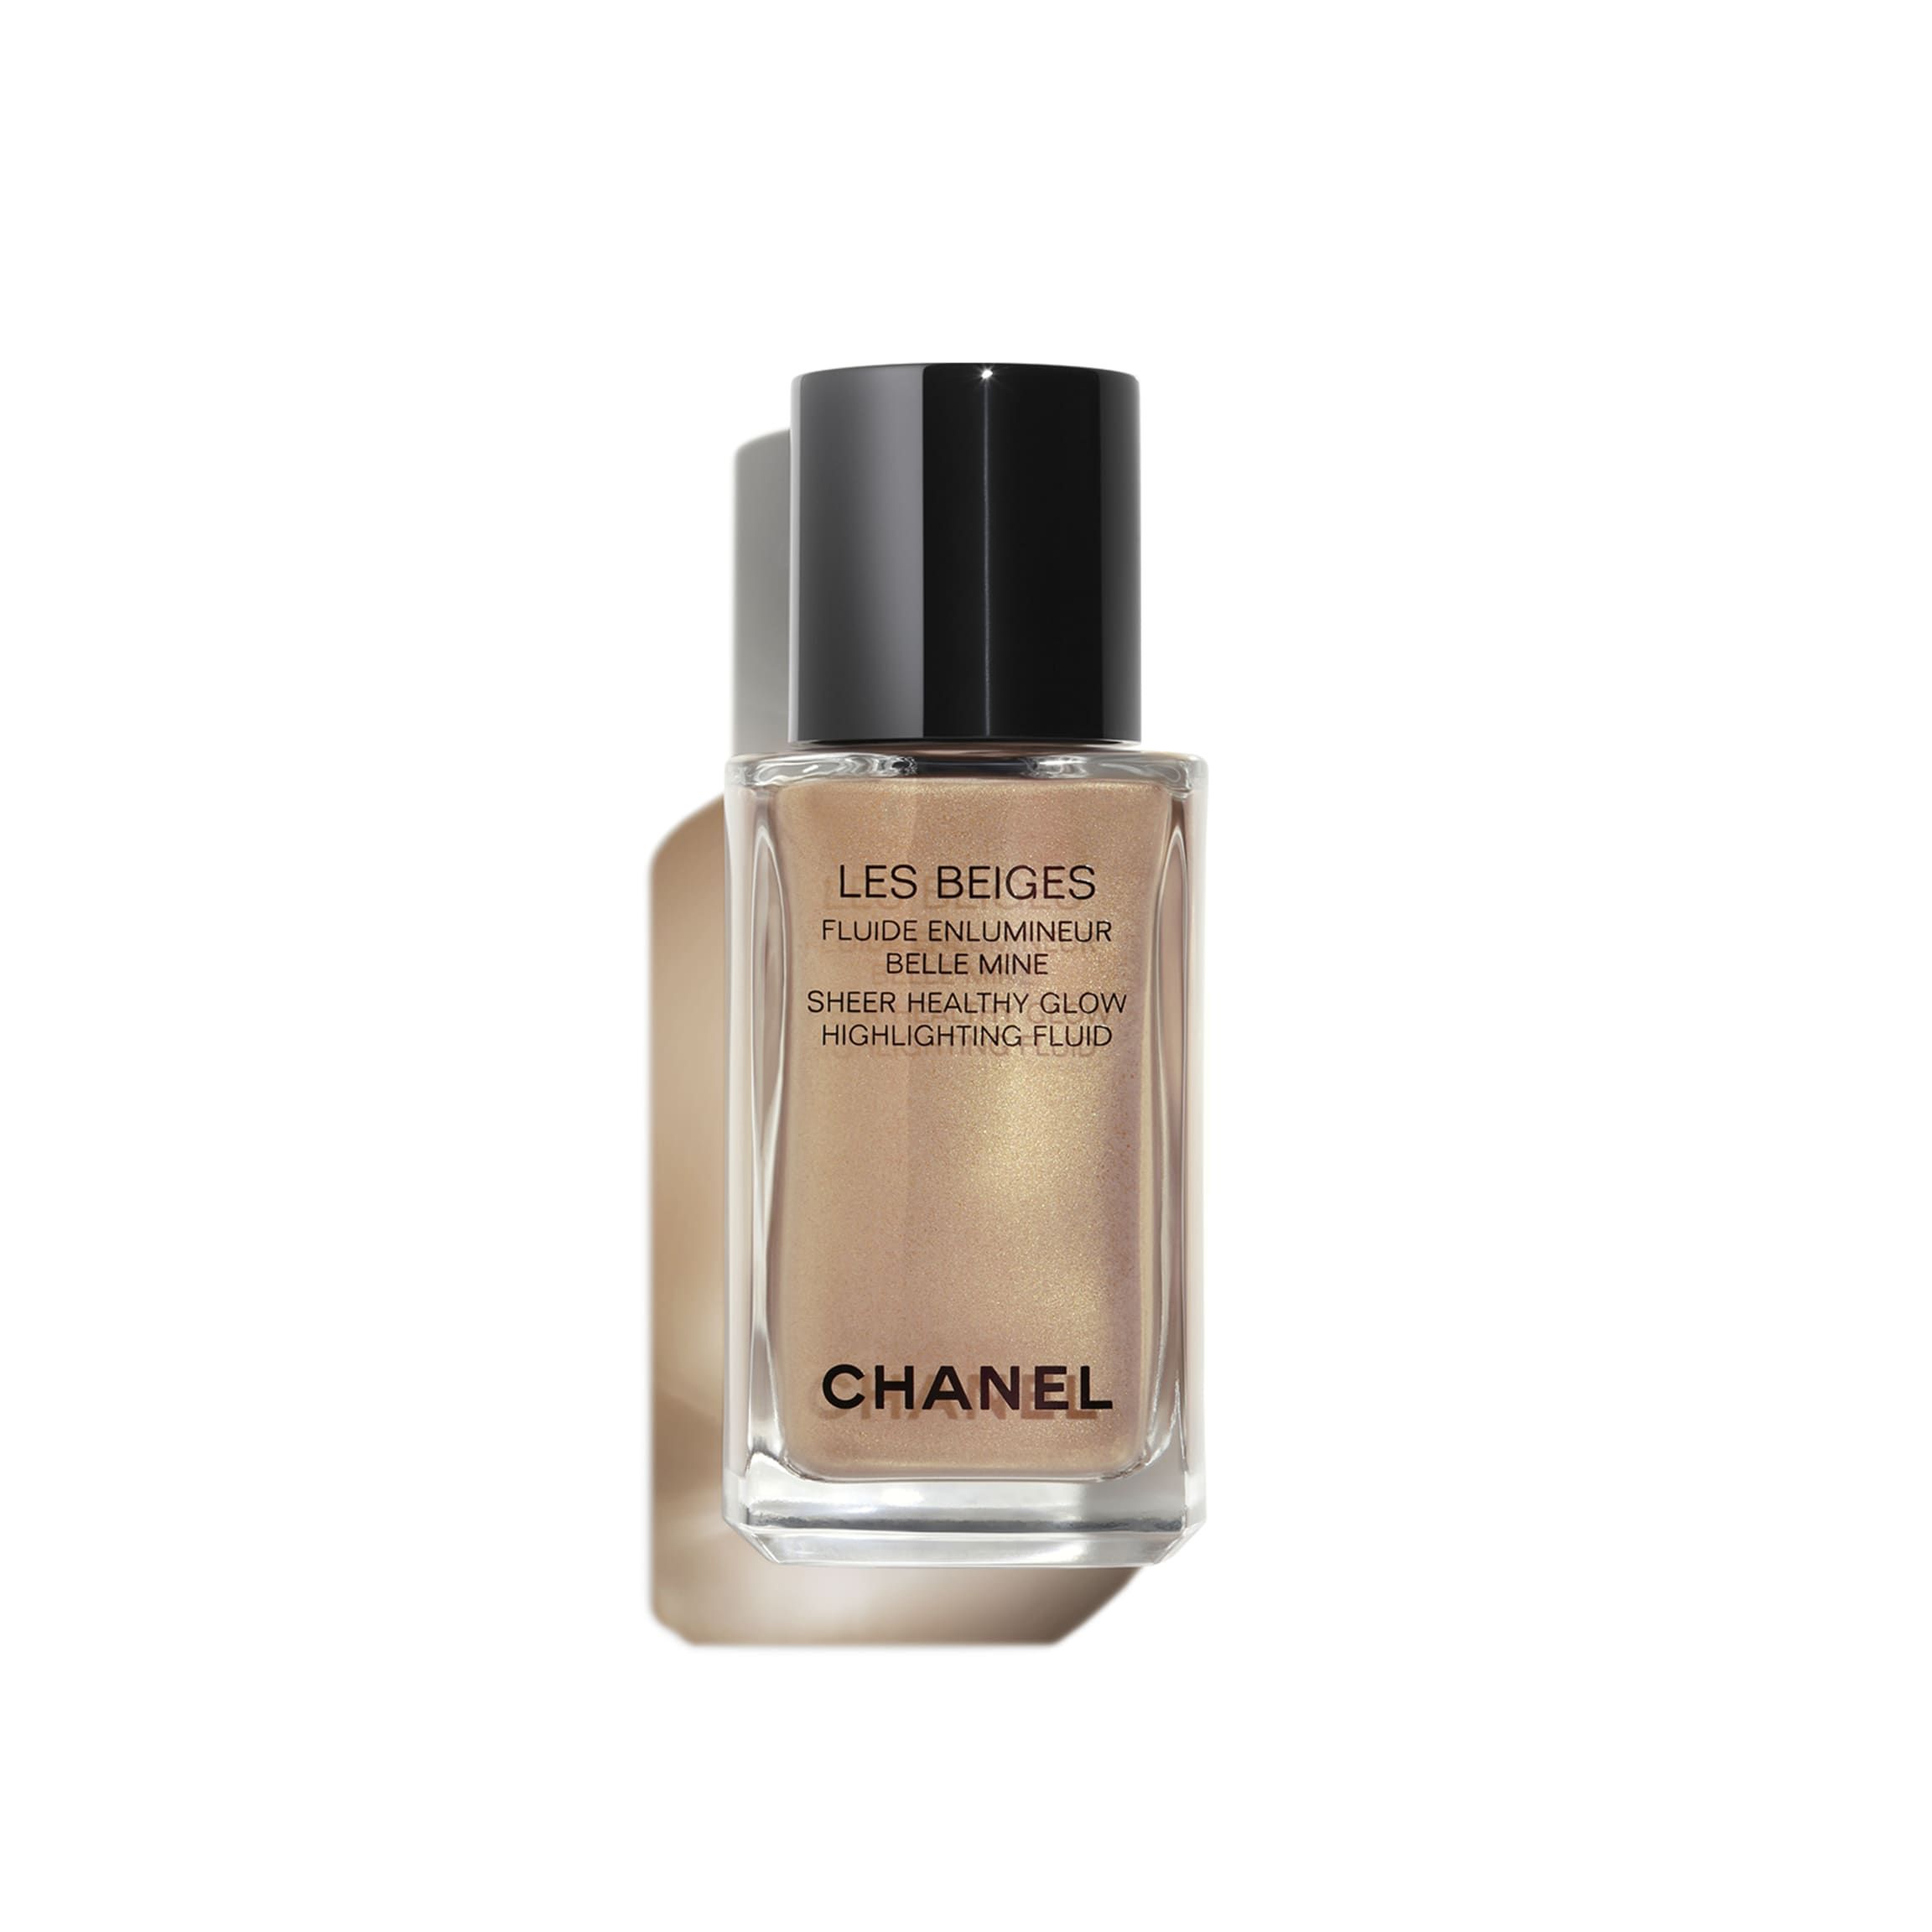 LES BEIGES Sheer Healthy Glow Highlighting Fluid SUNKISSED | CHANEL | Chanel, Inc. (US)